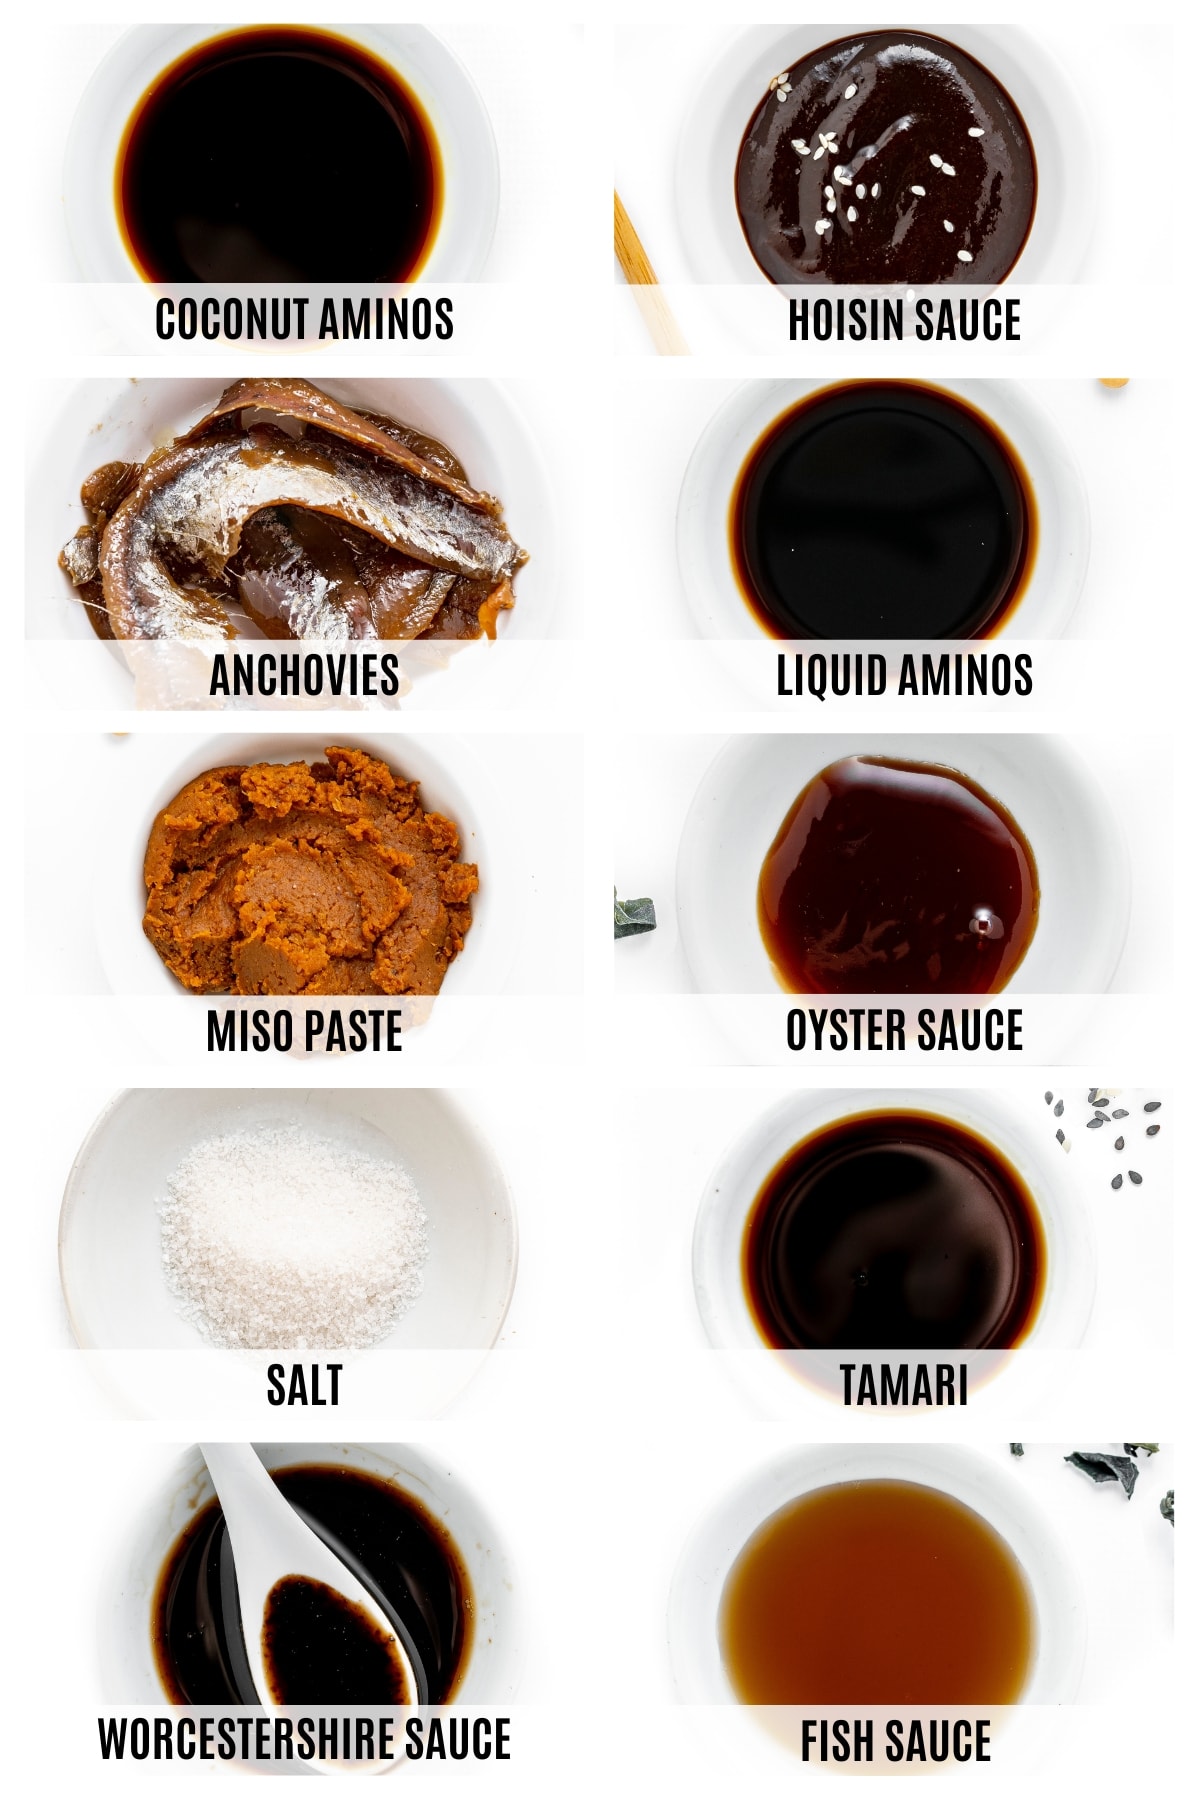 https://www.wholesomeyum.com/wp-content/uploads/2023/02/wholesomeyum-10-Easy-Soy-Sauce-Substitutes-Recipe.jpg